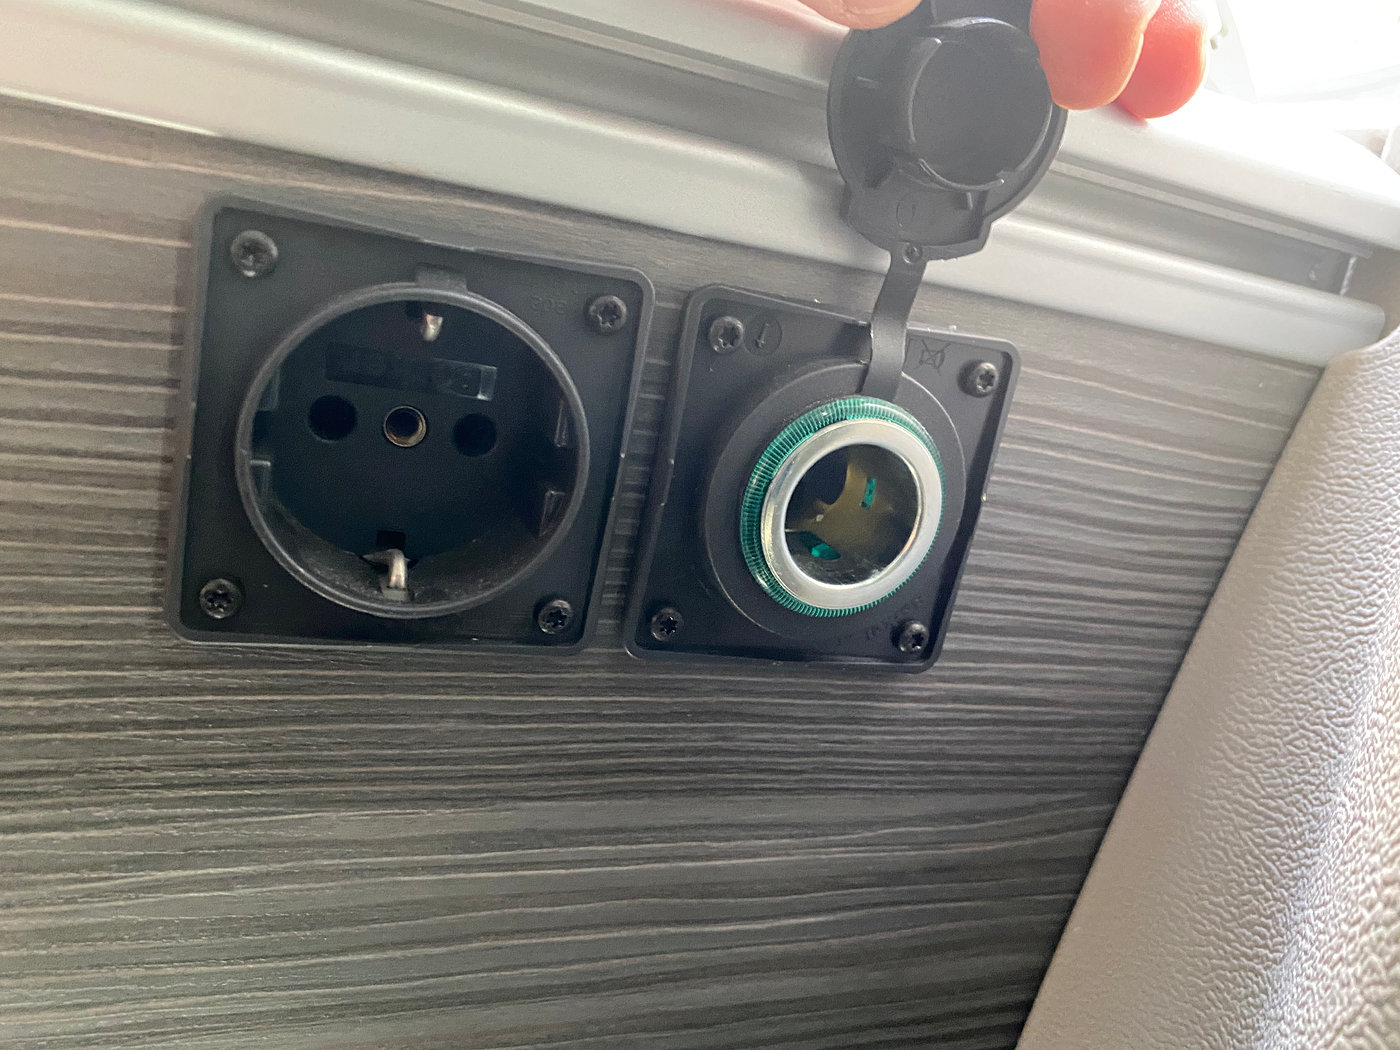 Replace VW California kitchen 12v outlet with USB charger - 2022